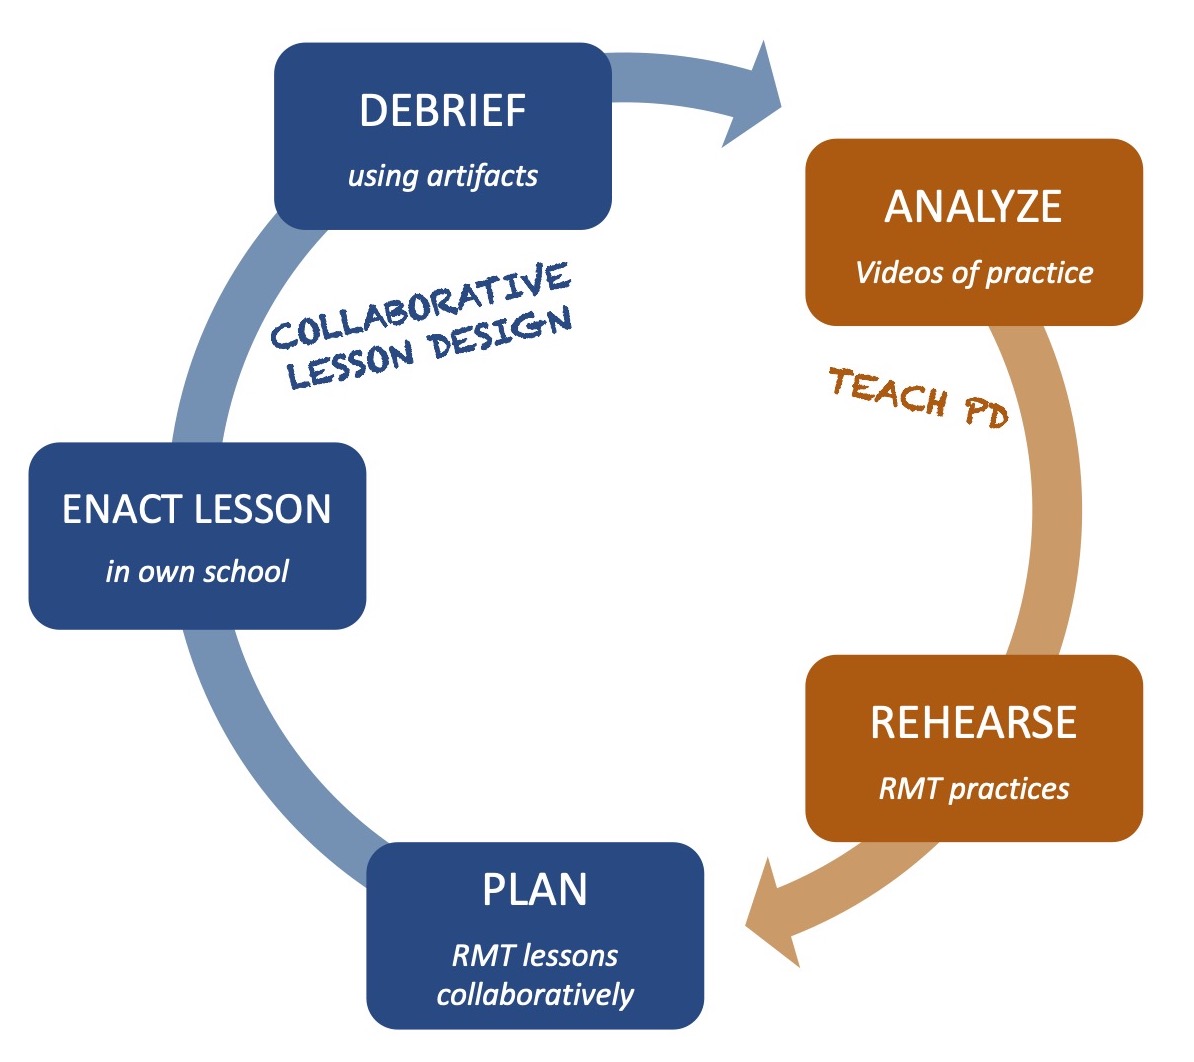 The collaborative lesson design cycle is Plan (RMT lessons collaboratively), Enact Lesson (in own school), Debrief (using artifacts). The Teach PD cycles is Analyze (videos of practice) and Rehearse (RMT practices). 